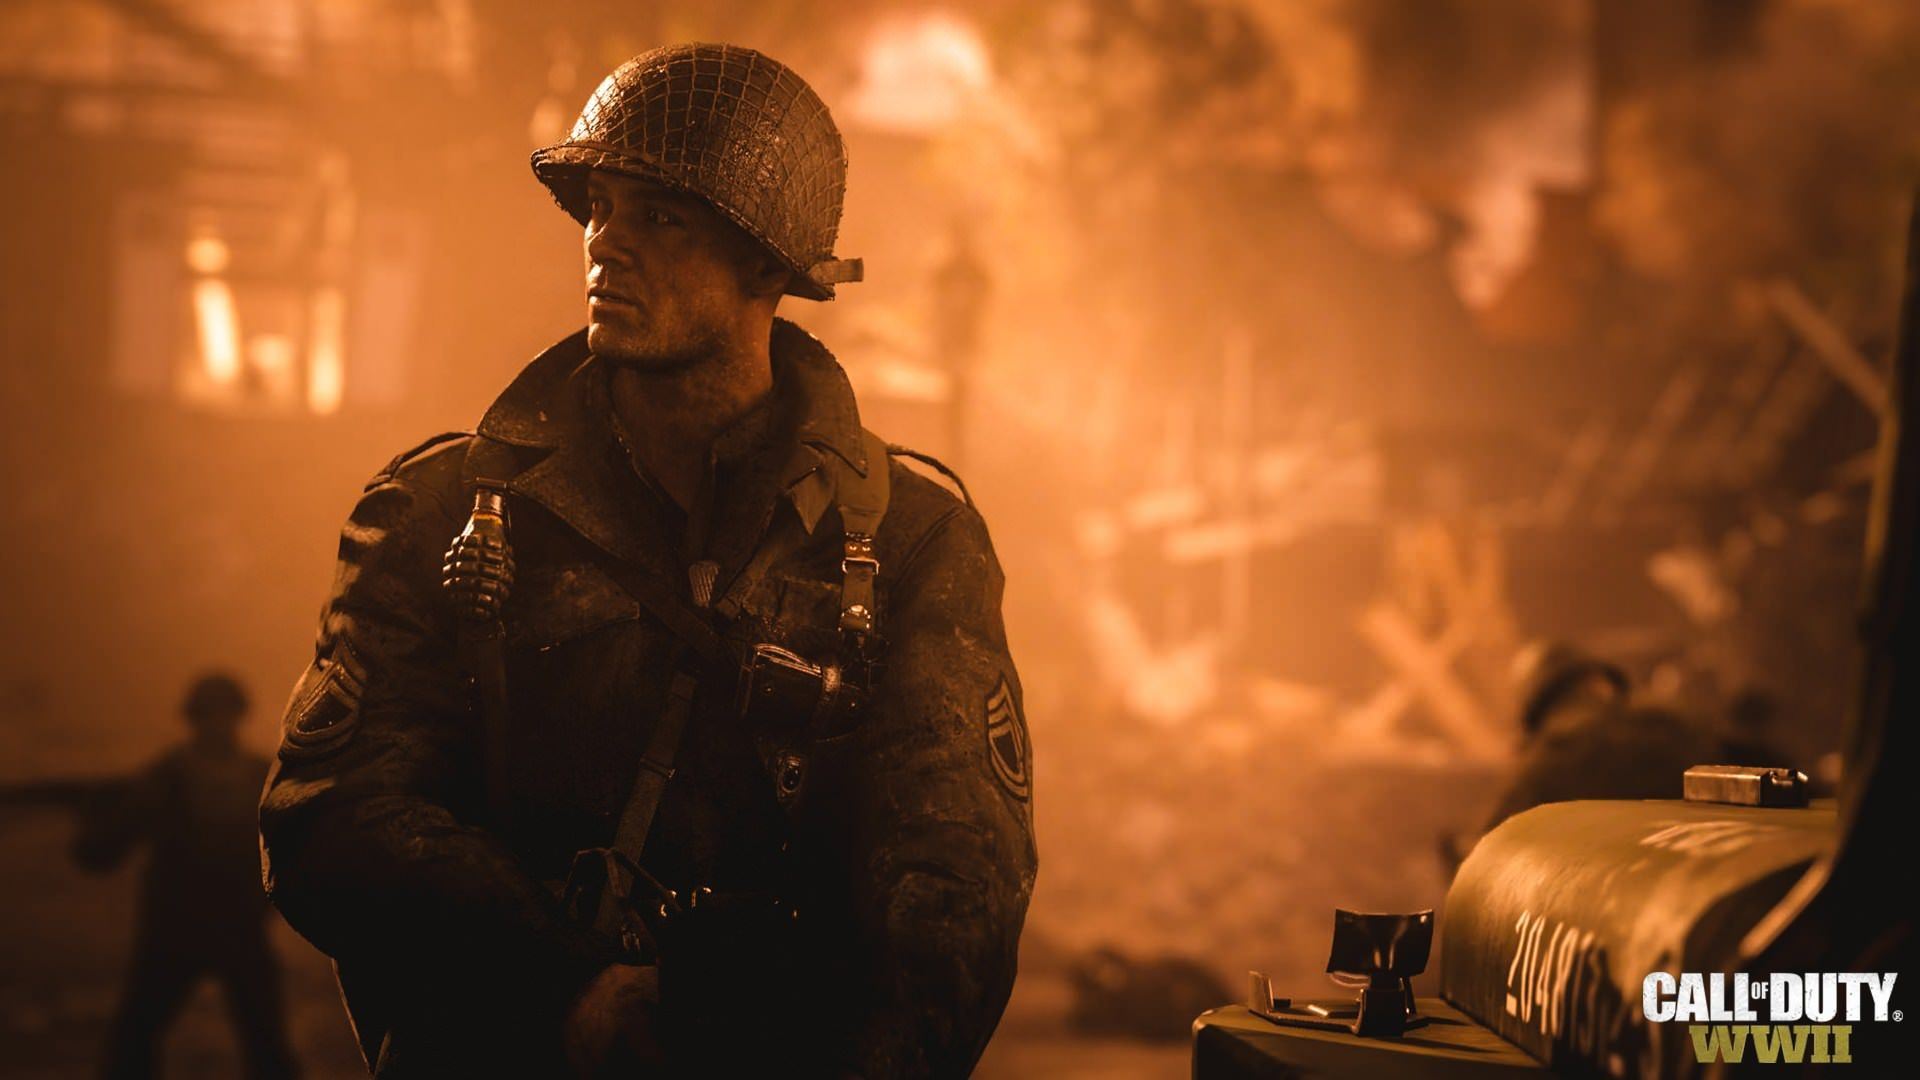 Call of Duty WWII Official Trailer